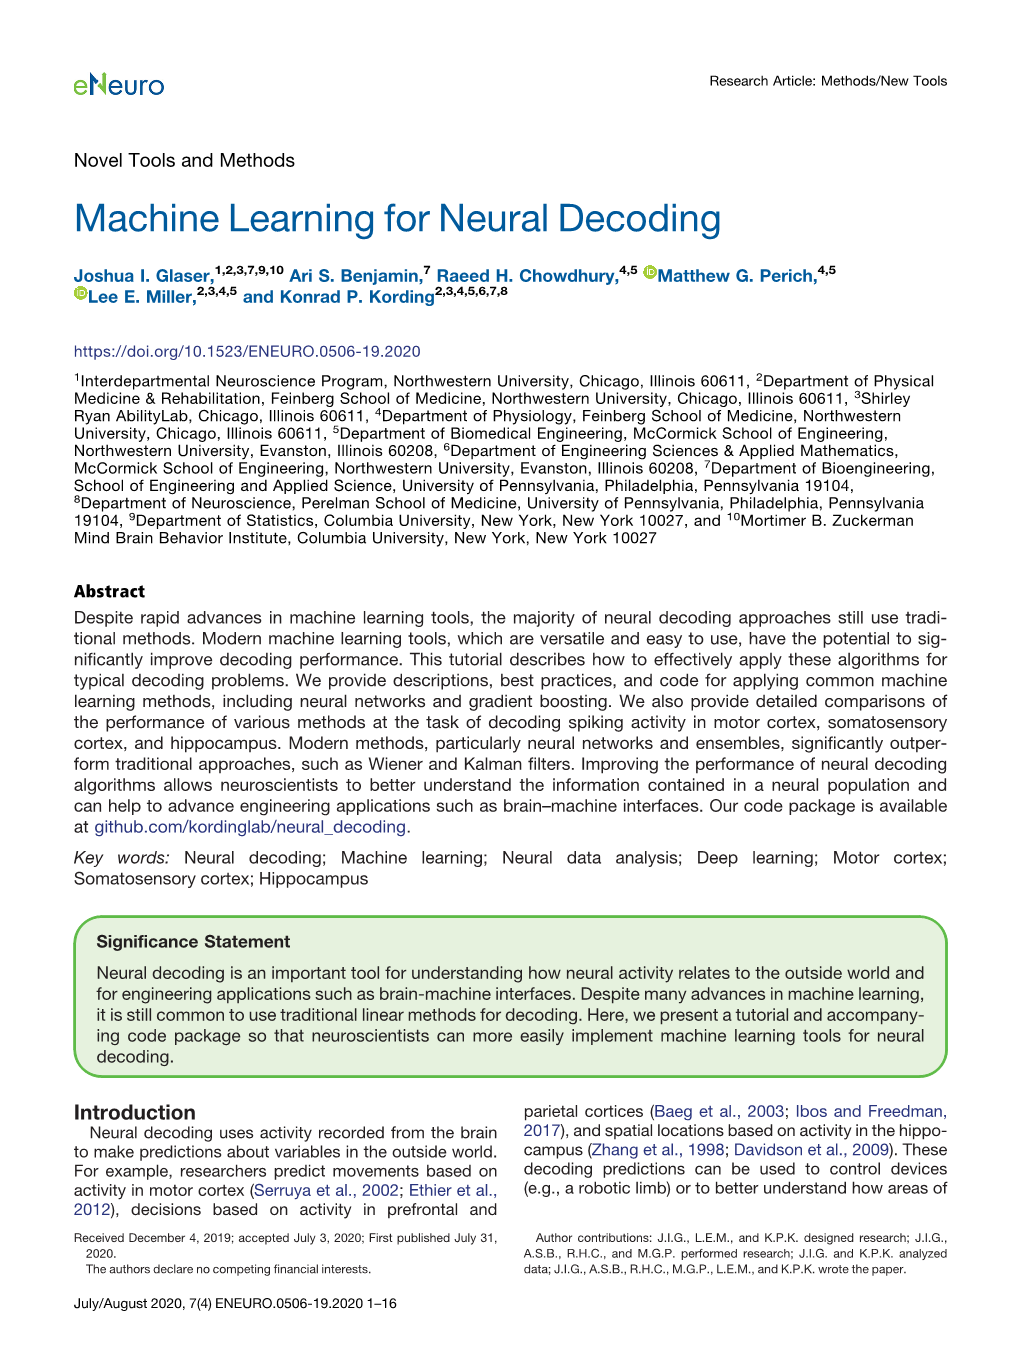 Machine Learning for Neural Decoding